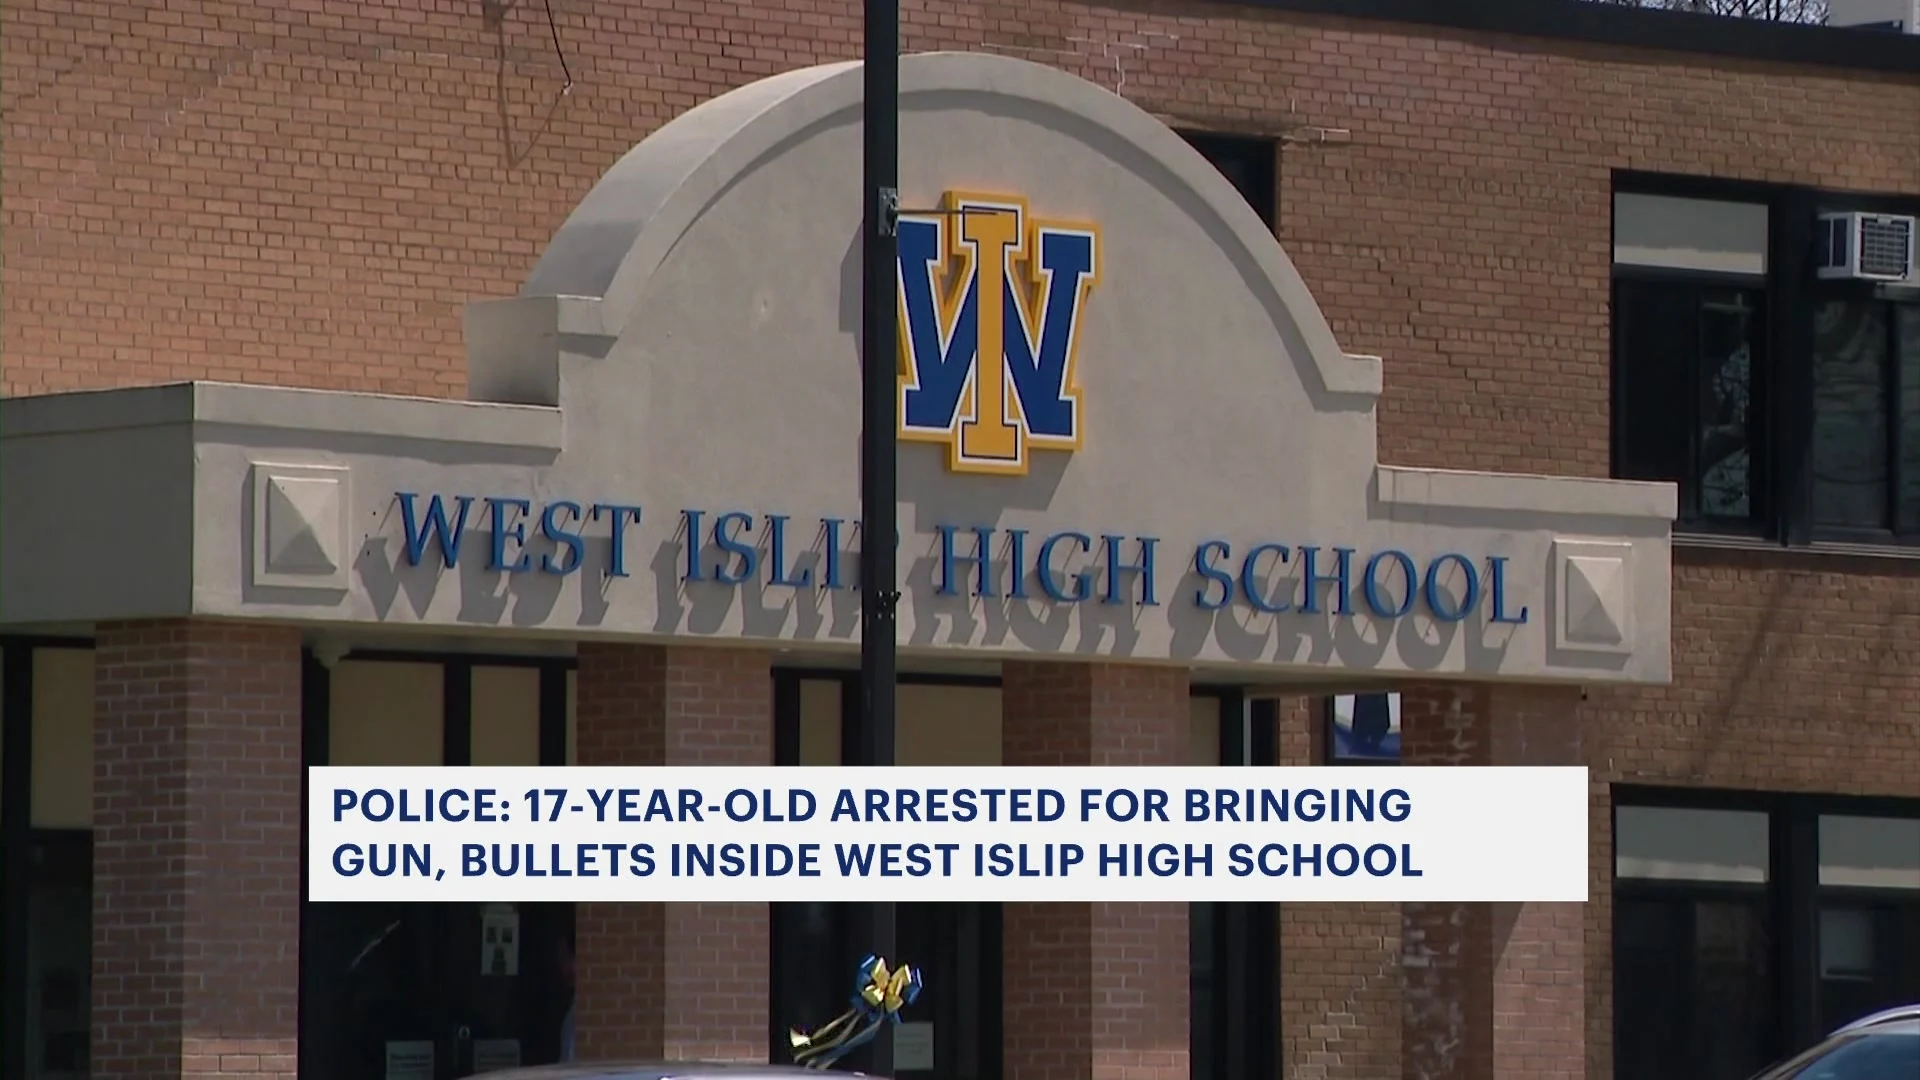 Police: Student, 17, charged with multiple felonies for bringing unloaded gun and bullets to school